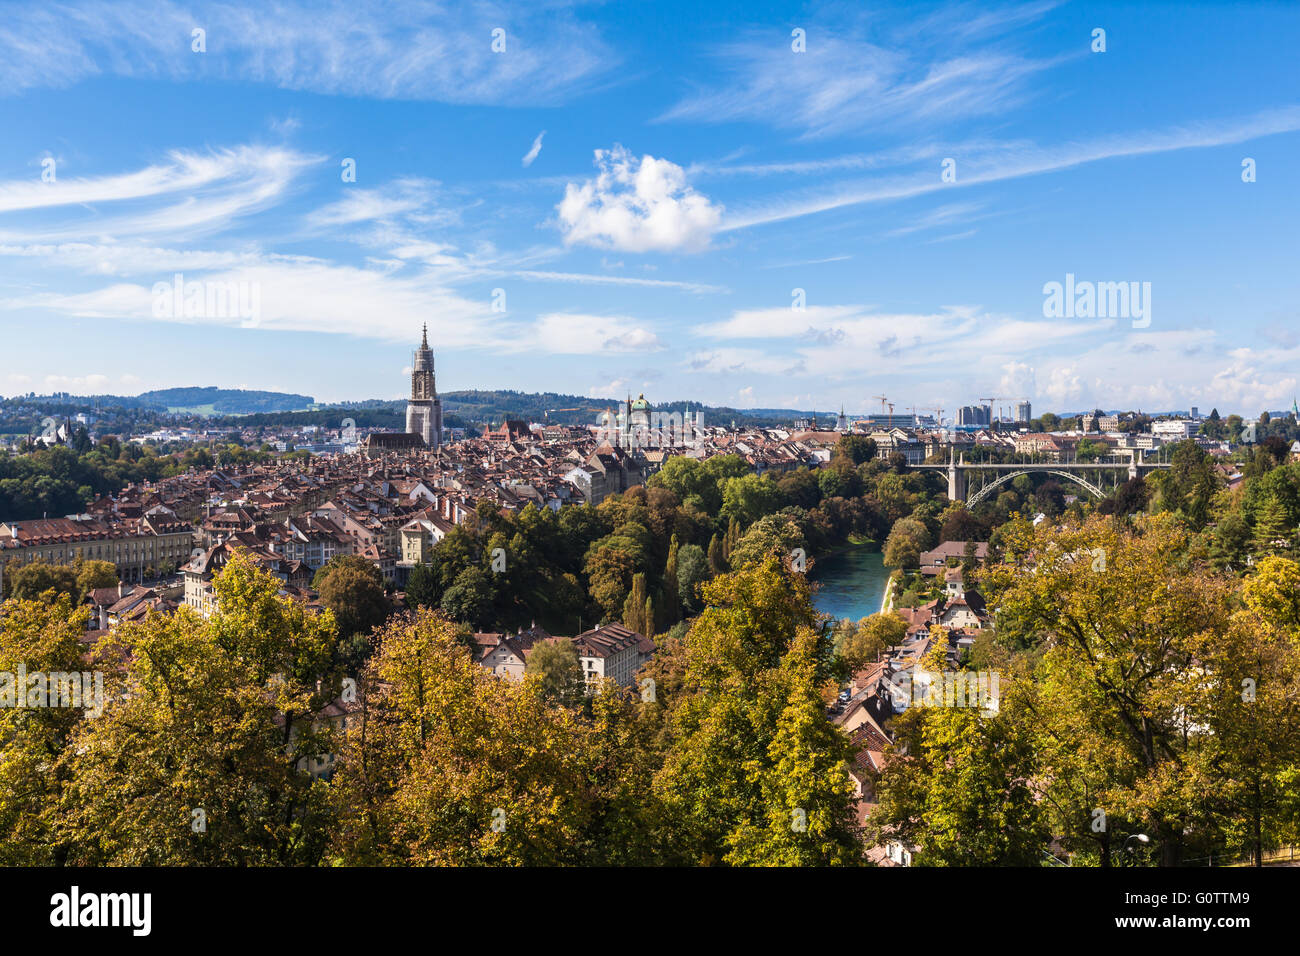 Panrama view of Berne old town from mountain top in rose garden Stock Photo